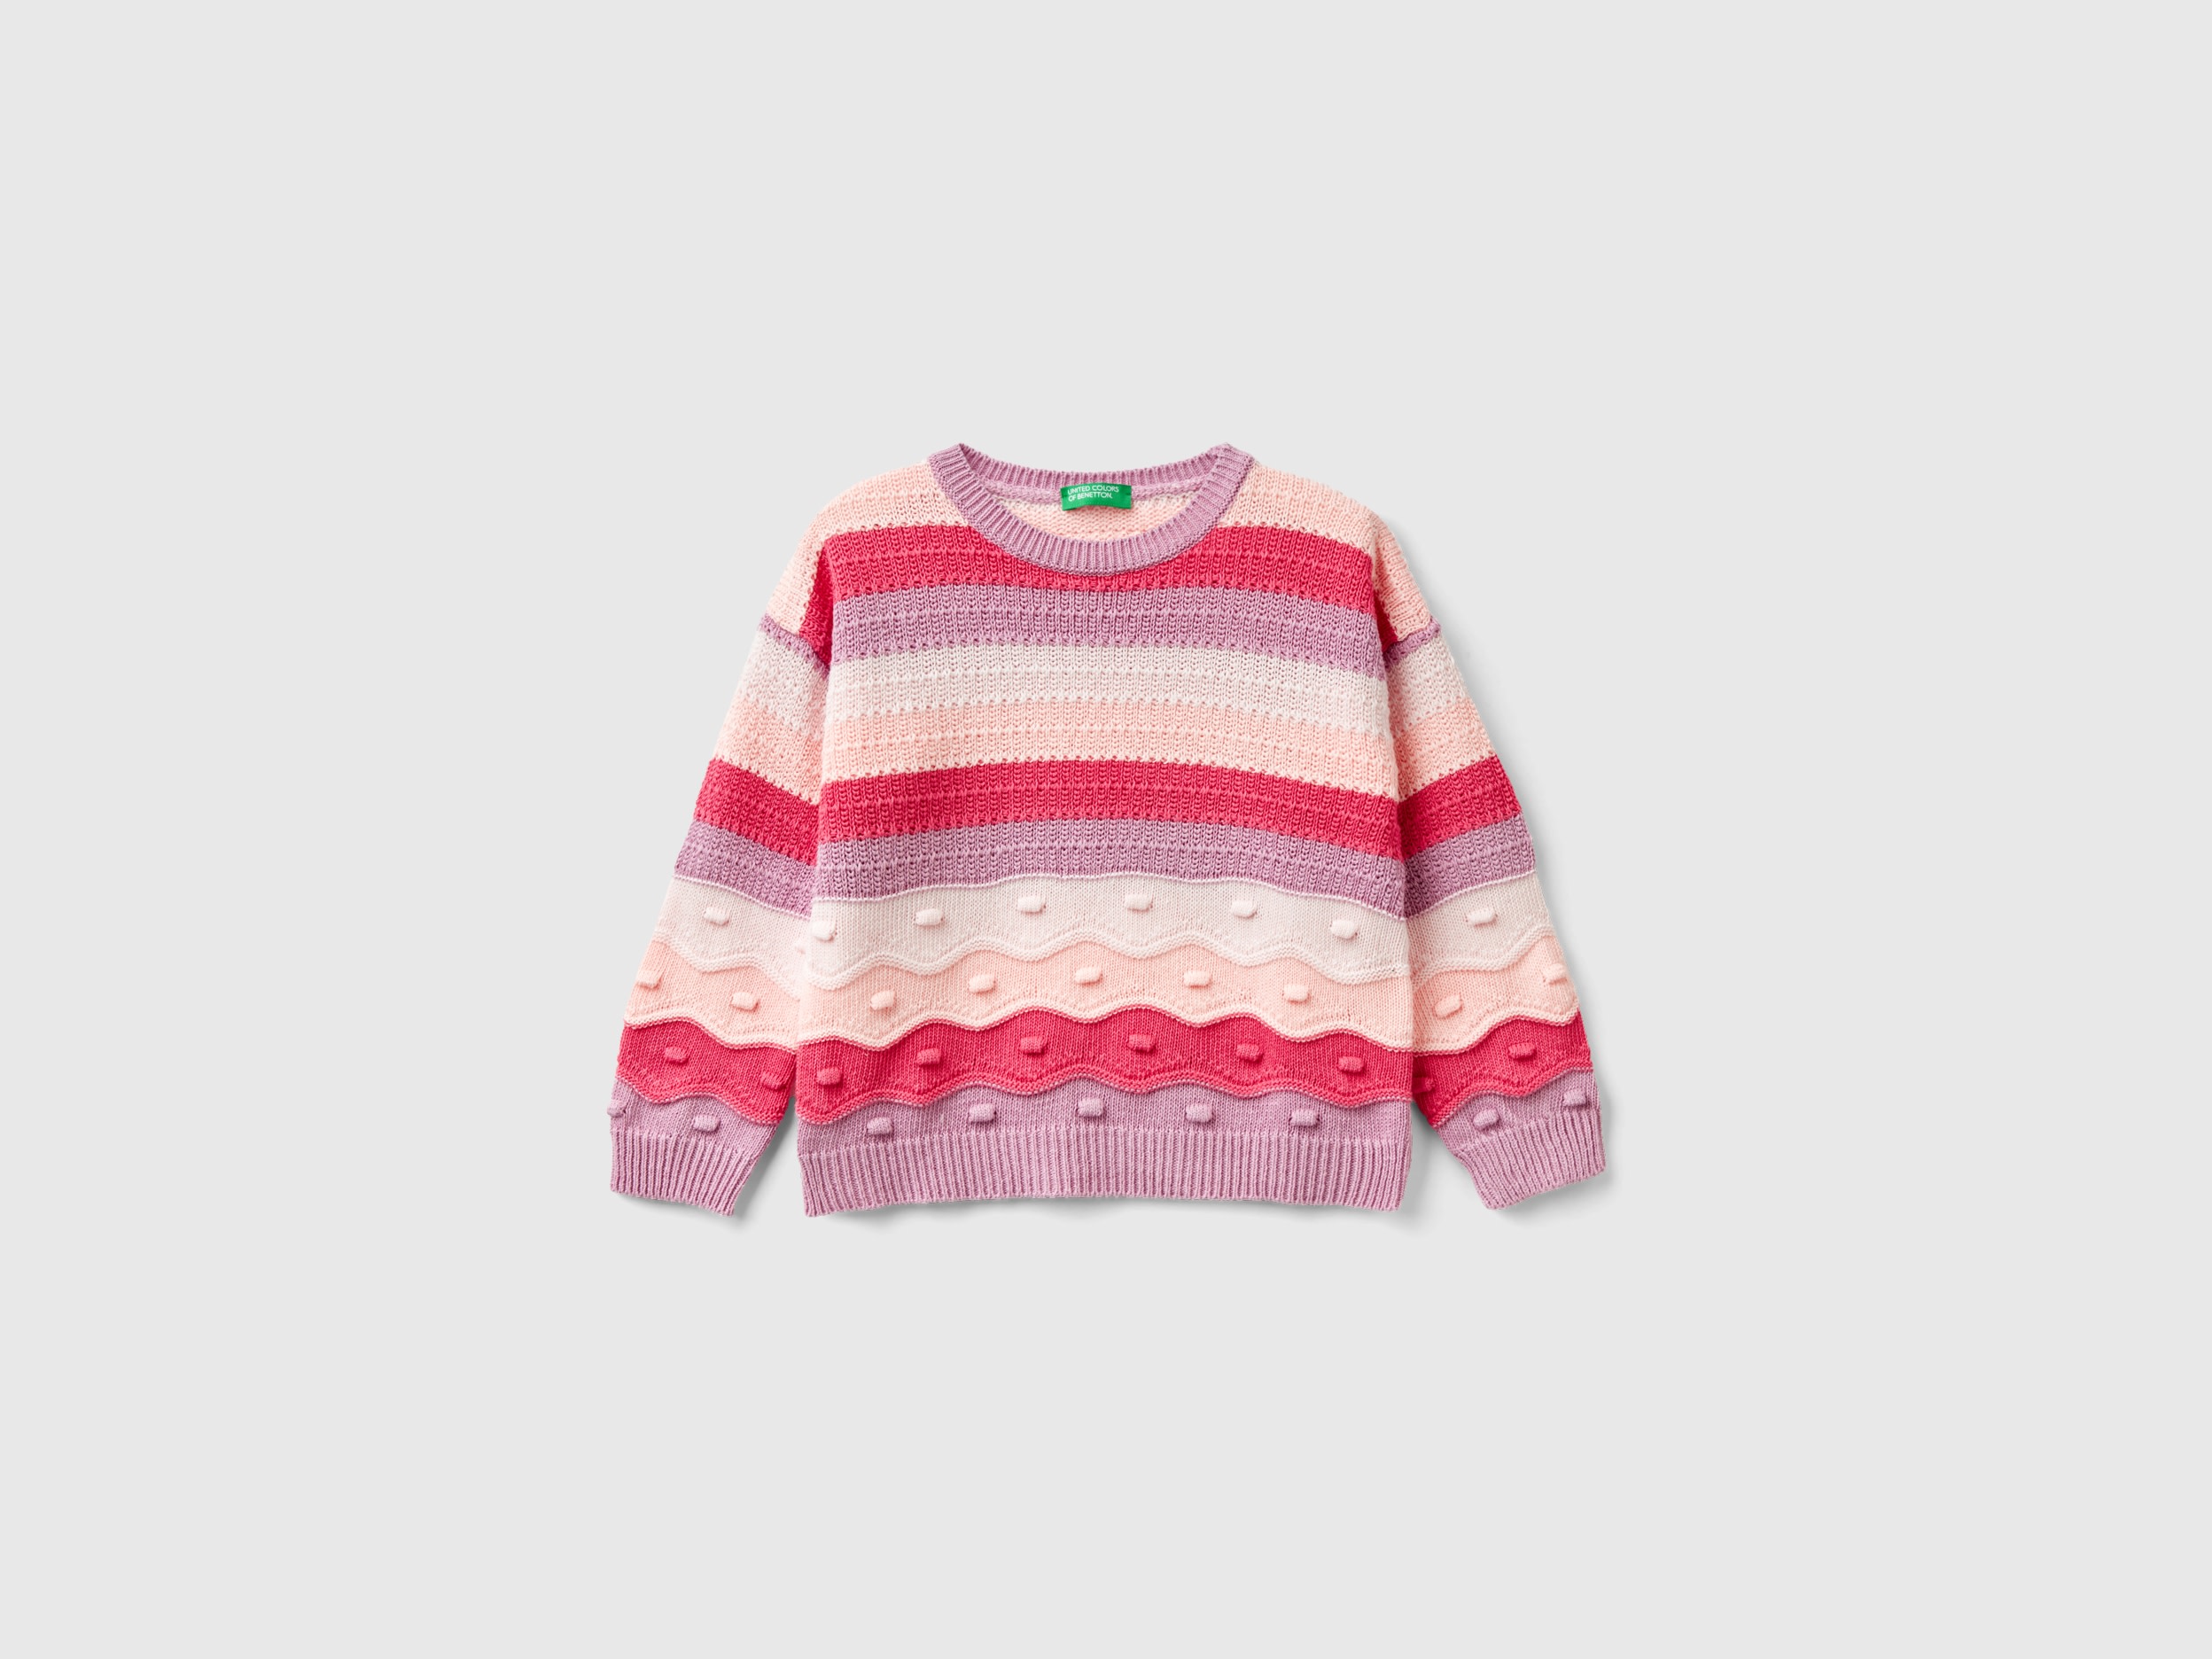 Image of Benetton, Striped Sweater In Recycled Cotton Blend, size 90, Multi-color, Kids